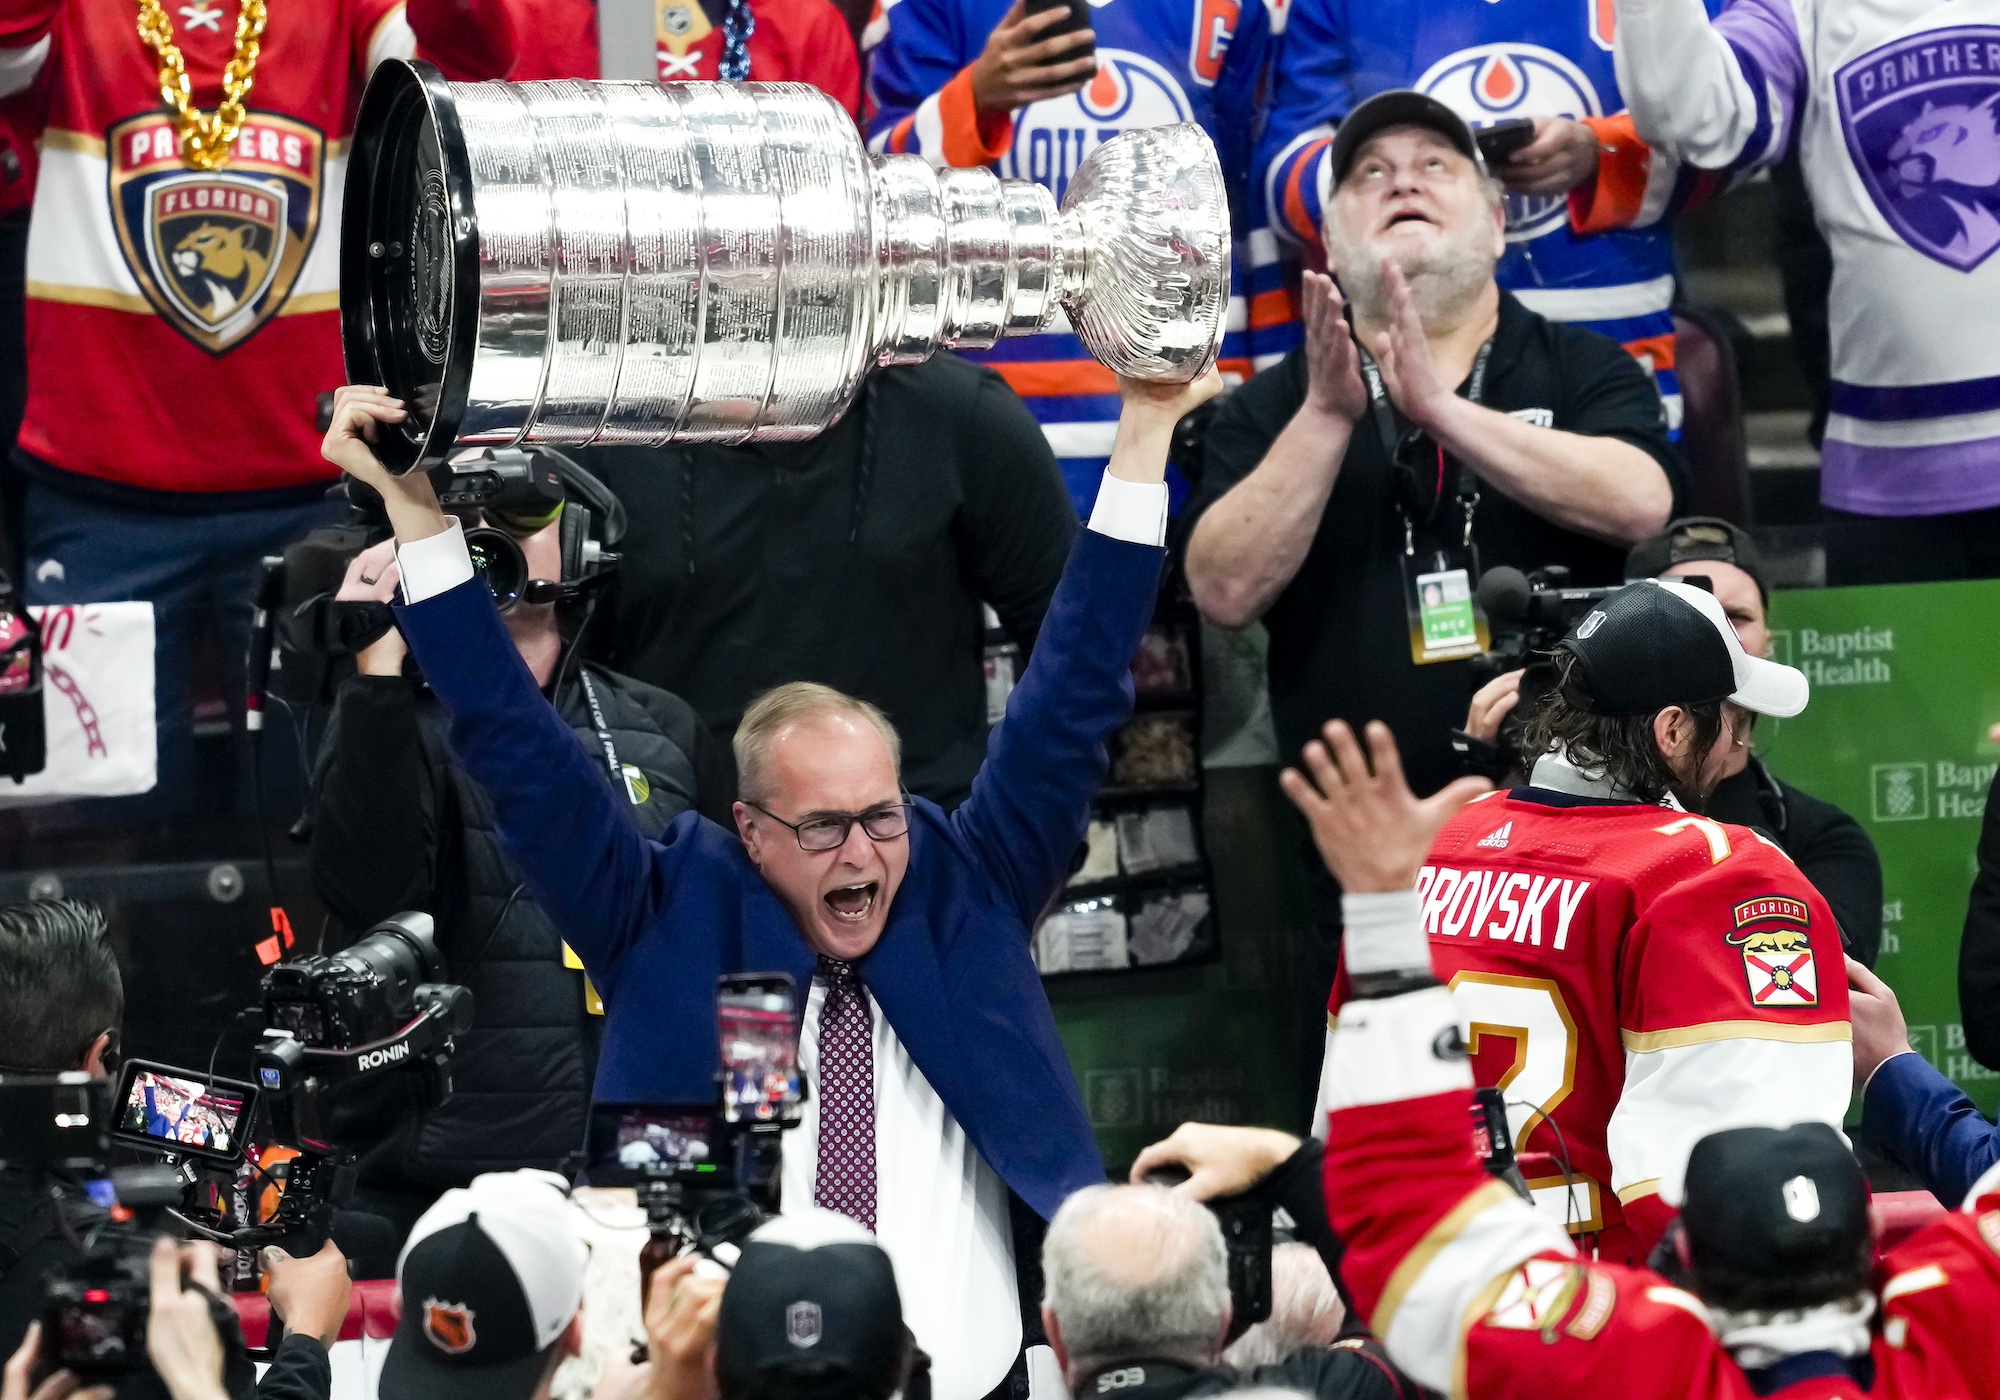 SUNRISE, FL - JUNE 24: Florida Panthers head coach Paul Maurice raises the Stanley Cup during the NHL Stanley Cup Finals, Game 7 between the Florida Panthers and Edmonton Oilers on June 24th, 2024 at Amerant Bank Arena in Sunrise, FL. (Photo by Andrew Bershaw/Icon Sportswire via Getty Images)